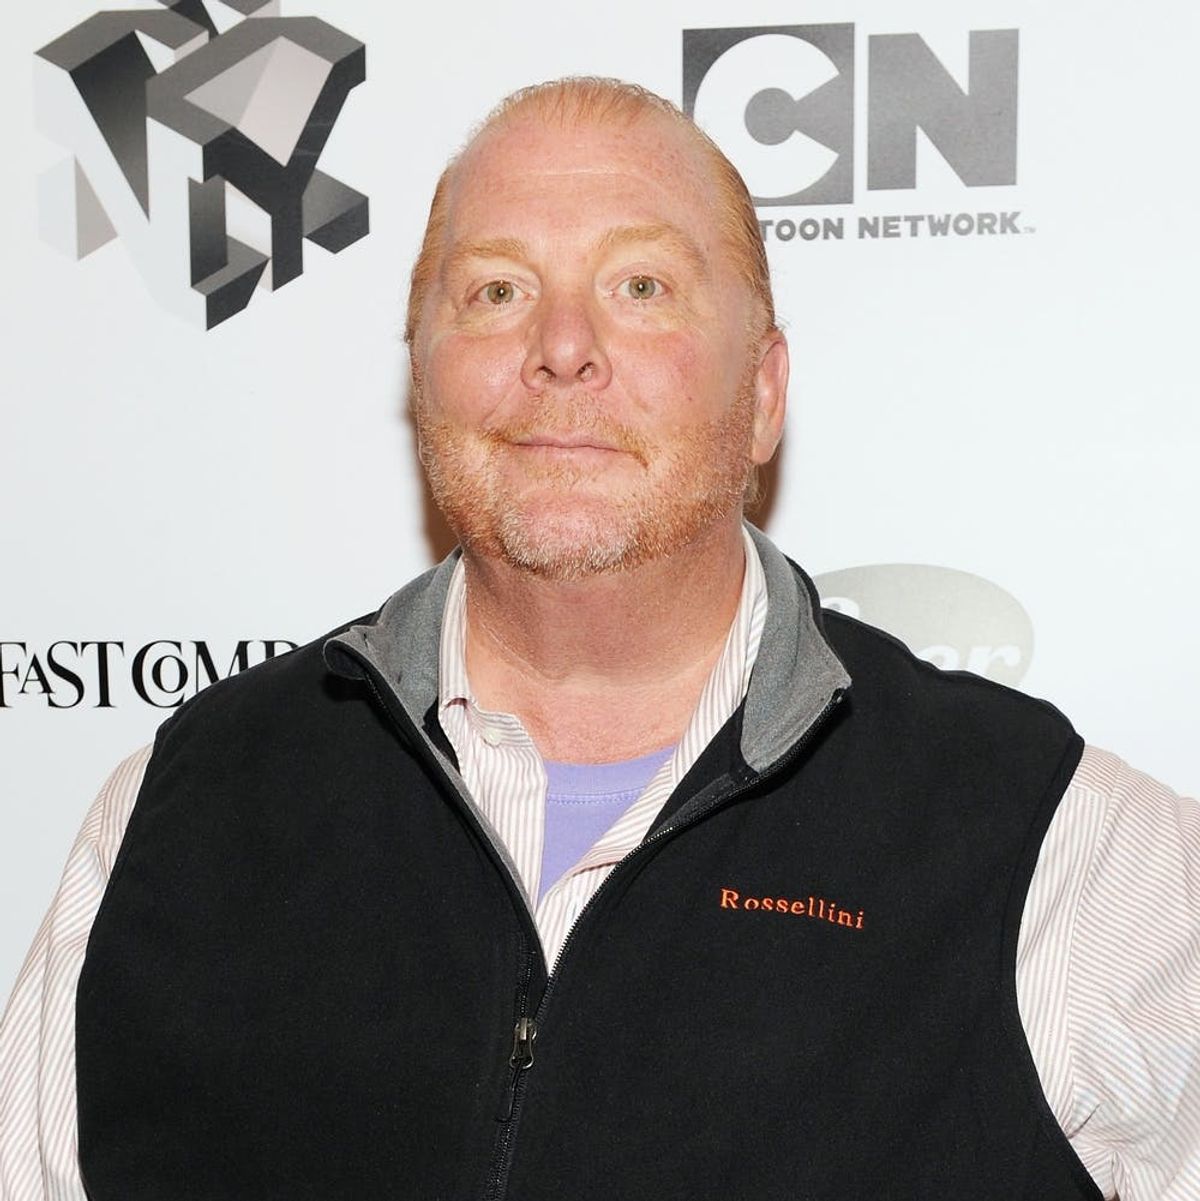 Celebrity Chef Mario Batali Ousted from Show and Restaurants Following Harassment Allegations